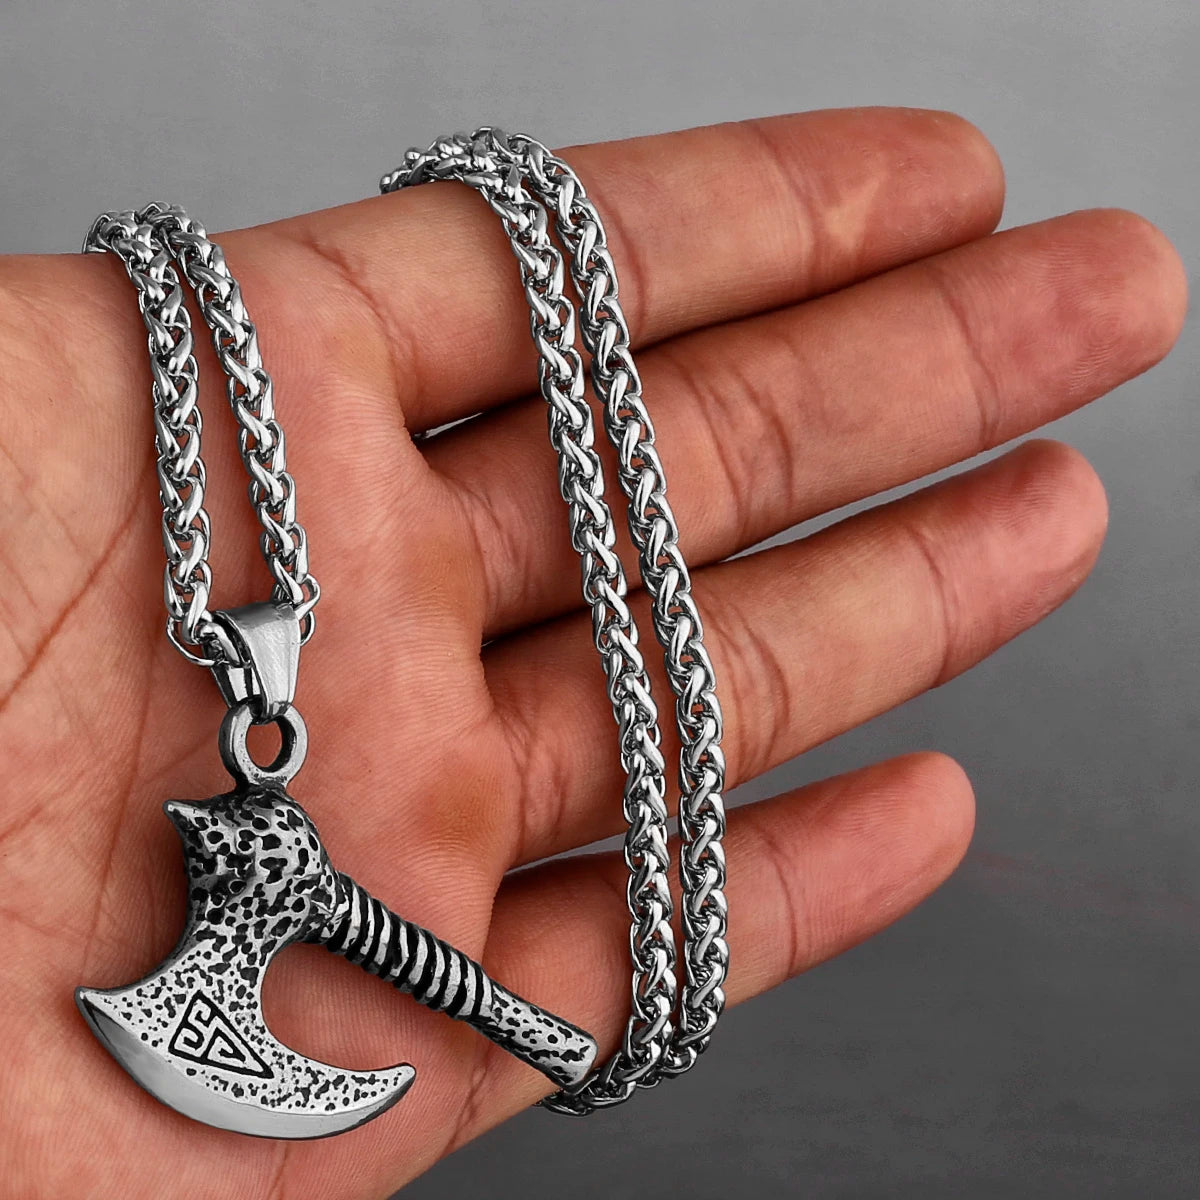 Viking Axe Necklace Pendant - Mythical Pieces Only Pendant / WJ 506